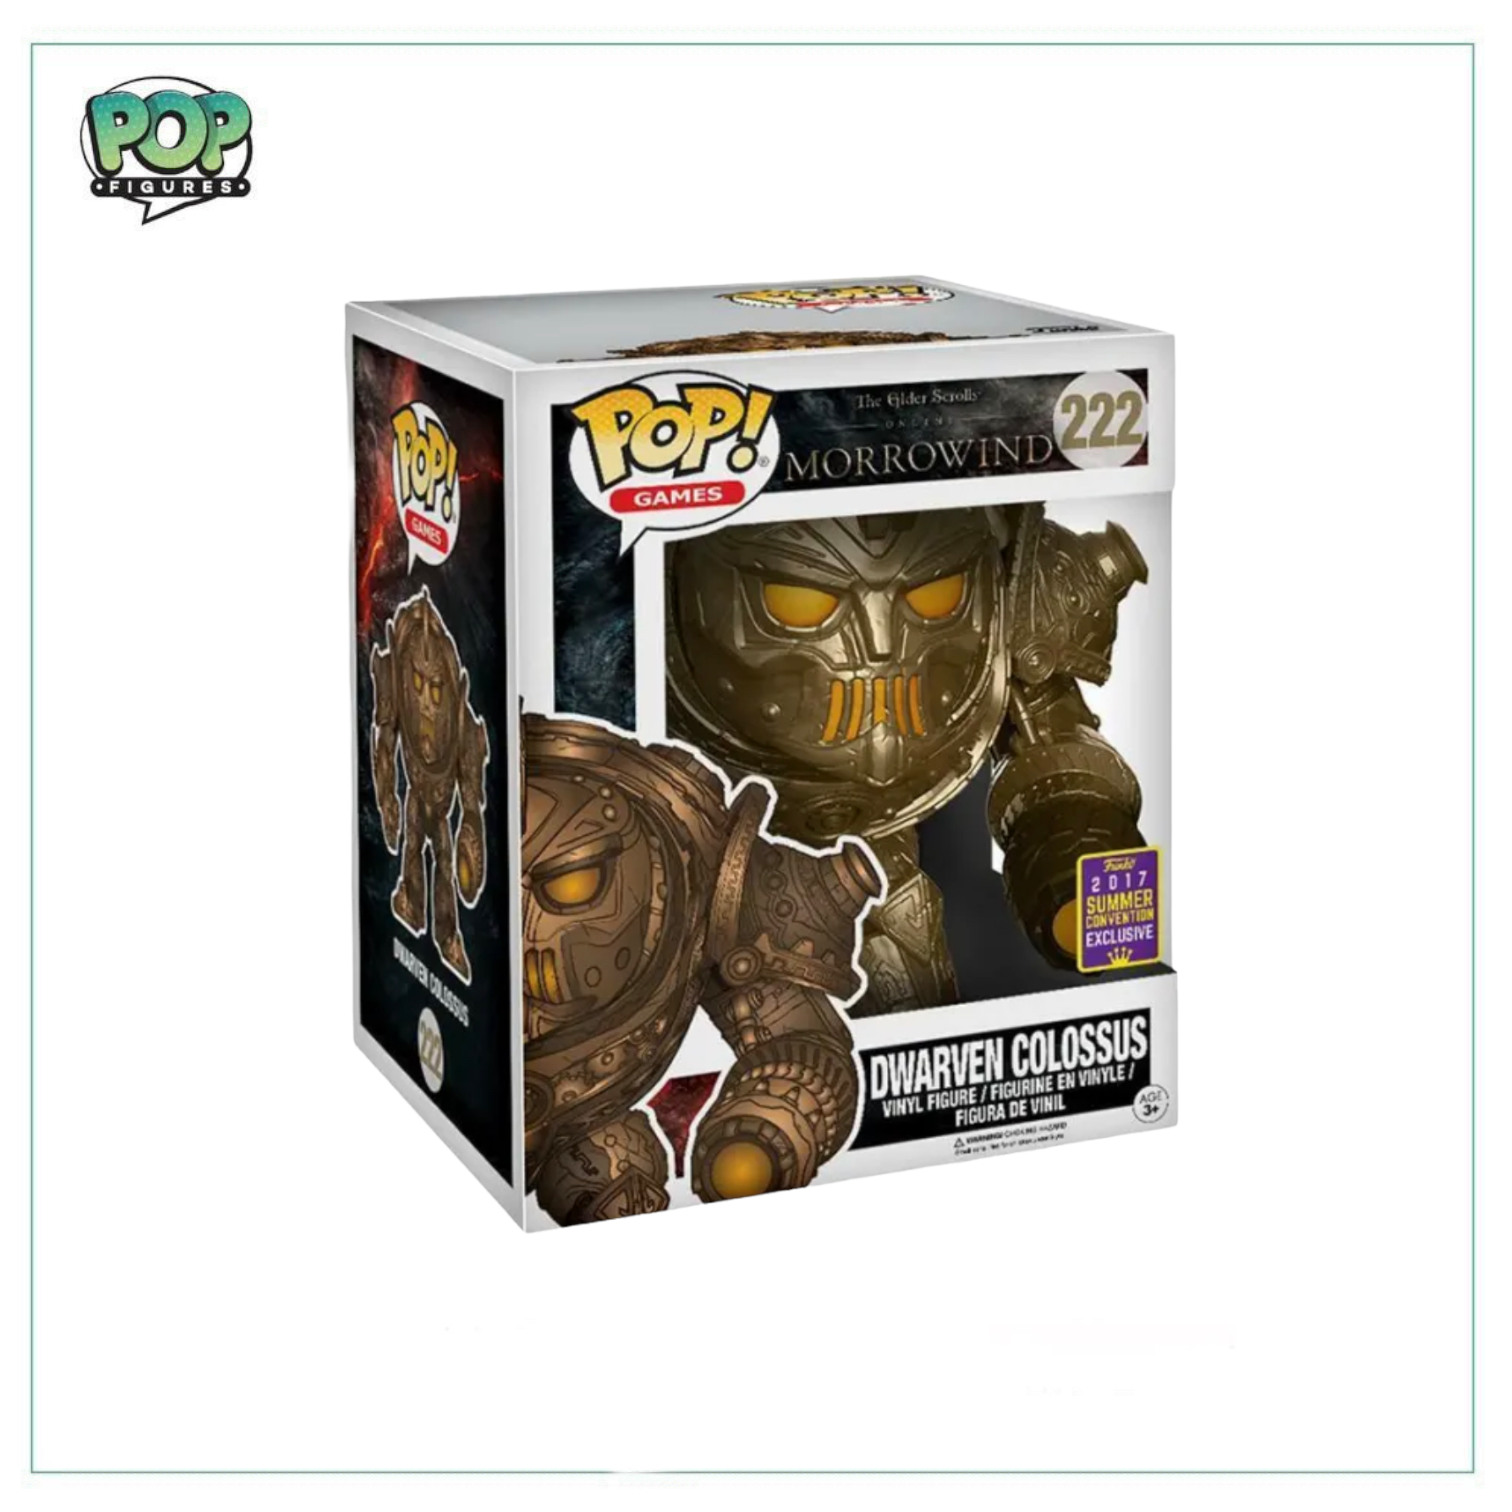 Dwarven Colossus #222 Deluxe Funko Pop! Morrowind - 2017 SDCC Shared Exclusive - Angry Cat